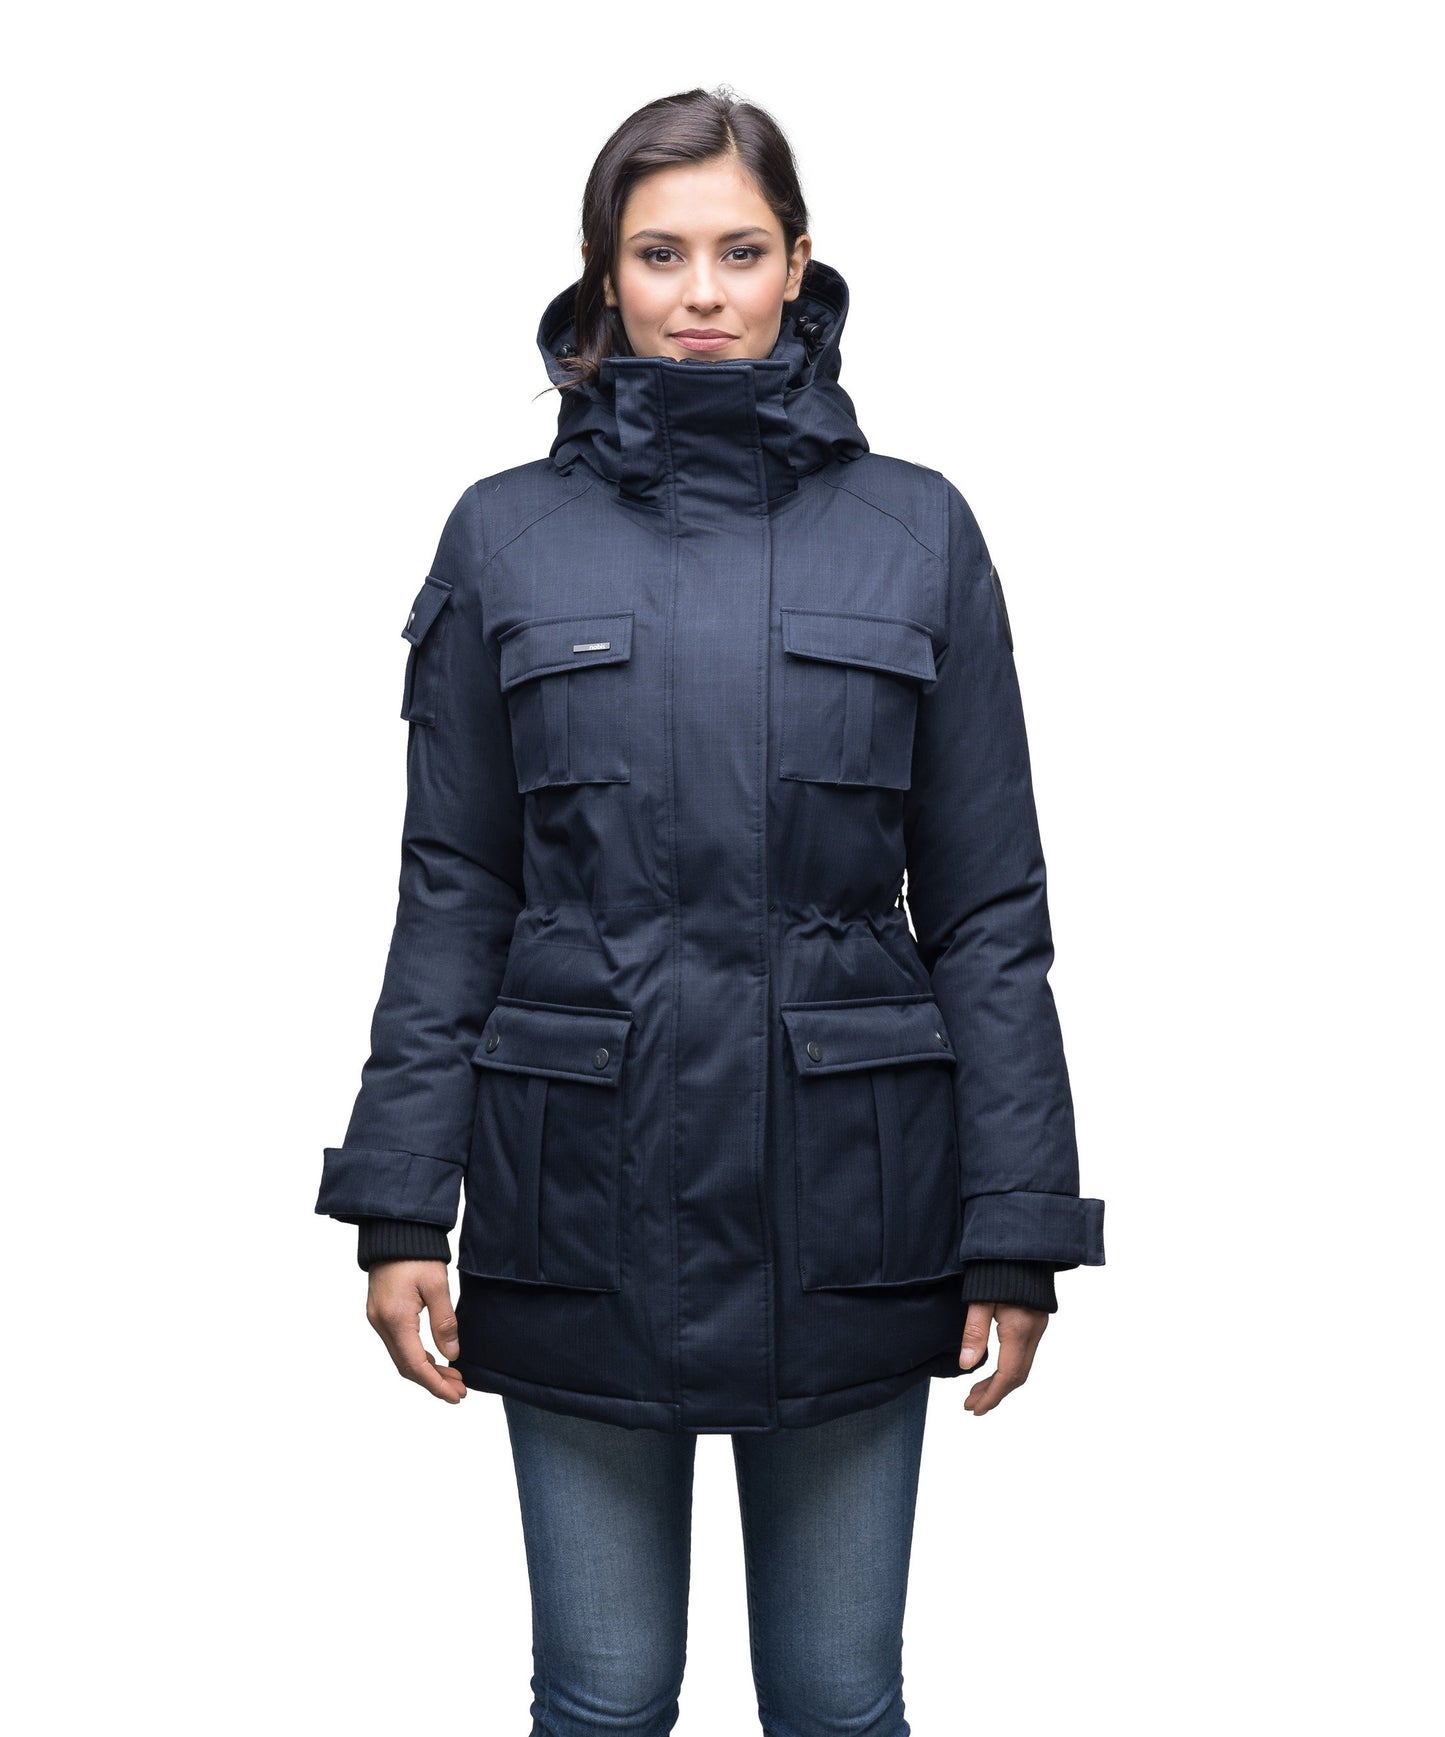 Women's down filled thigh length parka with four pleated patch pockets and an adjustable waist in CH Navy